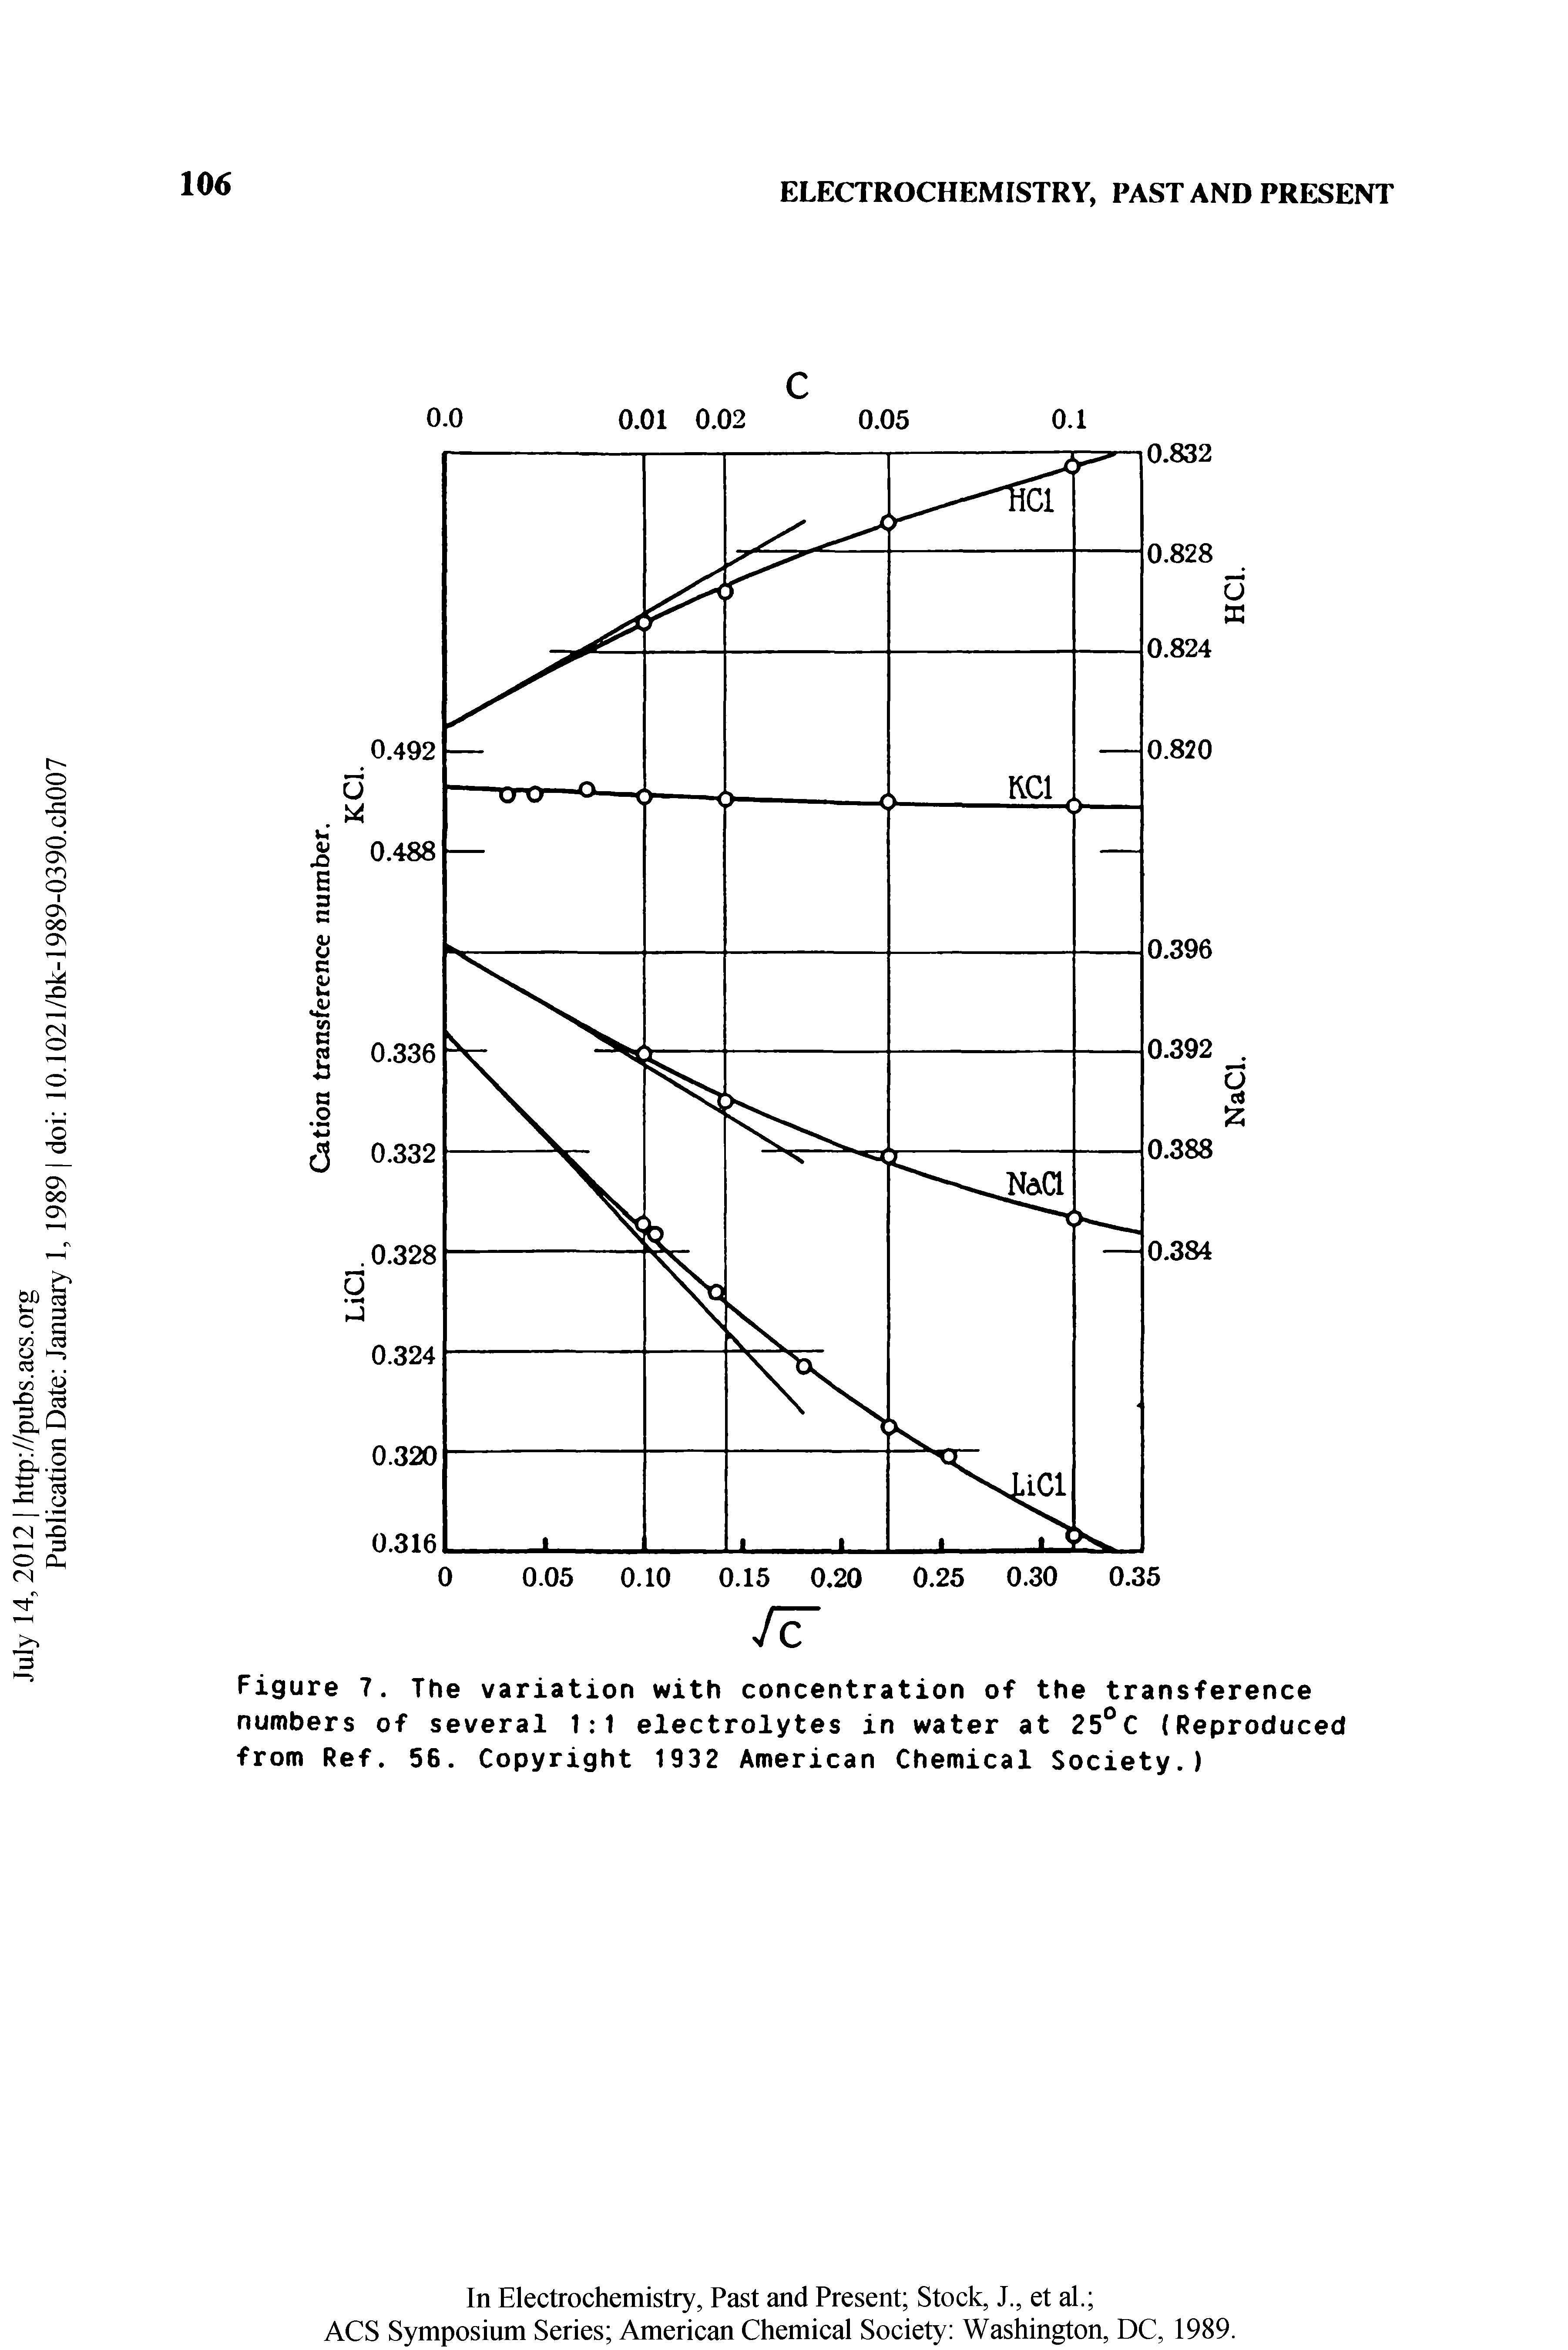 Figure 7. The variation with concentration of the transference numbers of several 1 1 electrolytes in water at 25°C (Reproduced from Ref. 56. Copyright 1932 American Chemical Society.)...